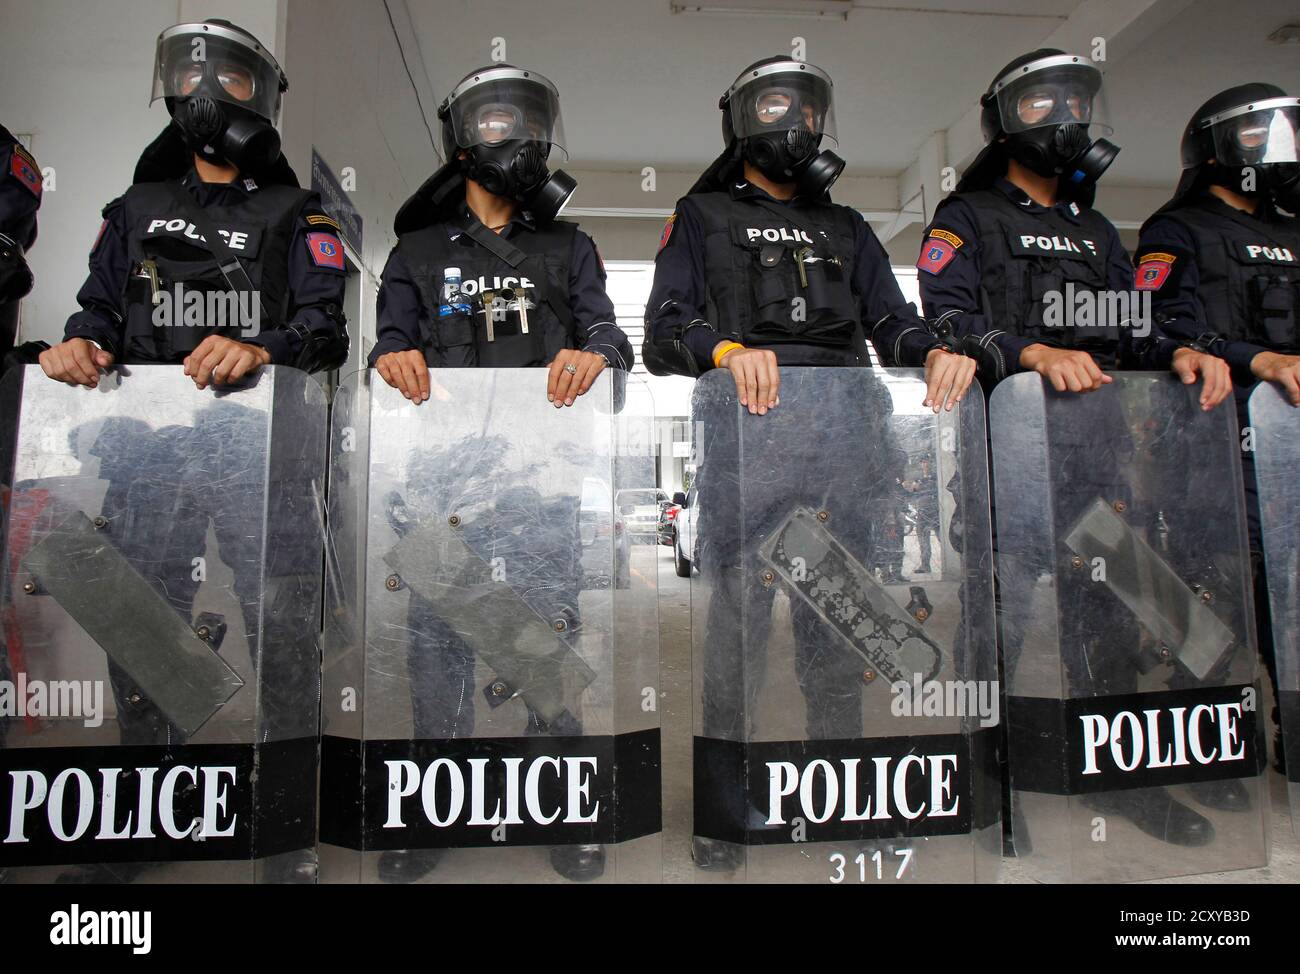 Riot police officers, wearing gas masks, stand with their shields during a demonstration for the media at the Royal Thai Police Sport Club in Bangkok January 7, 2014. Police organized the media demonstration to showcase teargas and rubber bullets, the only type of weaponry authorities say is being used for crowd-control situations. Police added that no riot police officers are allowed to carry live ammunition. According to authorities 20,000 police officers, backed up by troops, will be deployed in the streets on January 13, the first day of the planned "shutdown". REUTERS/Chaiwat Subprasom (T Stock Photo